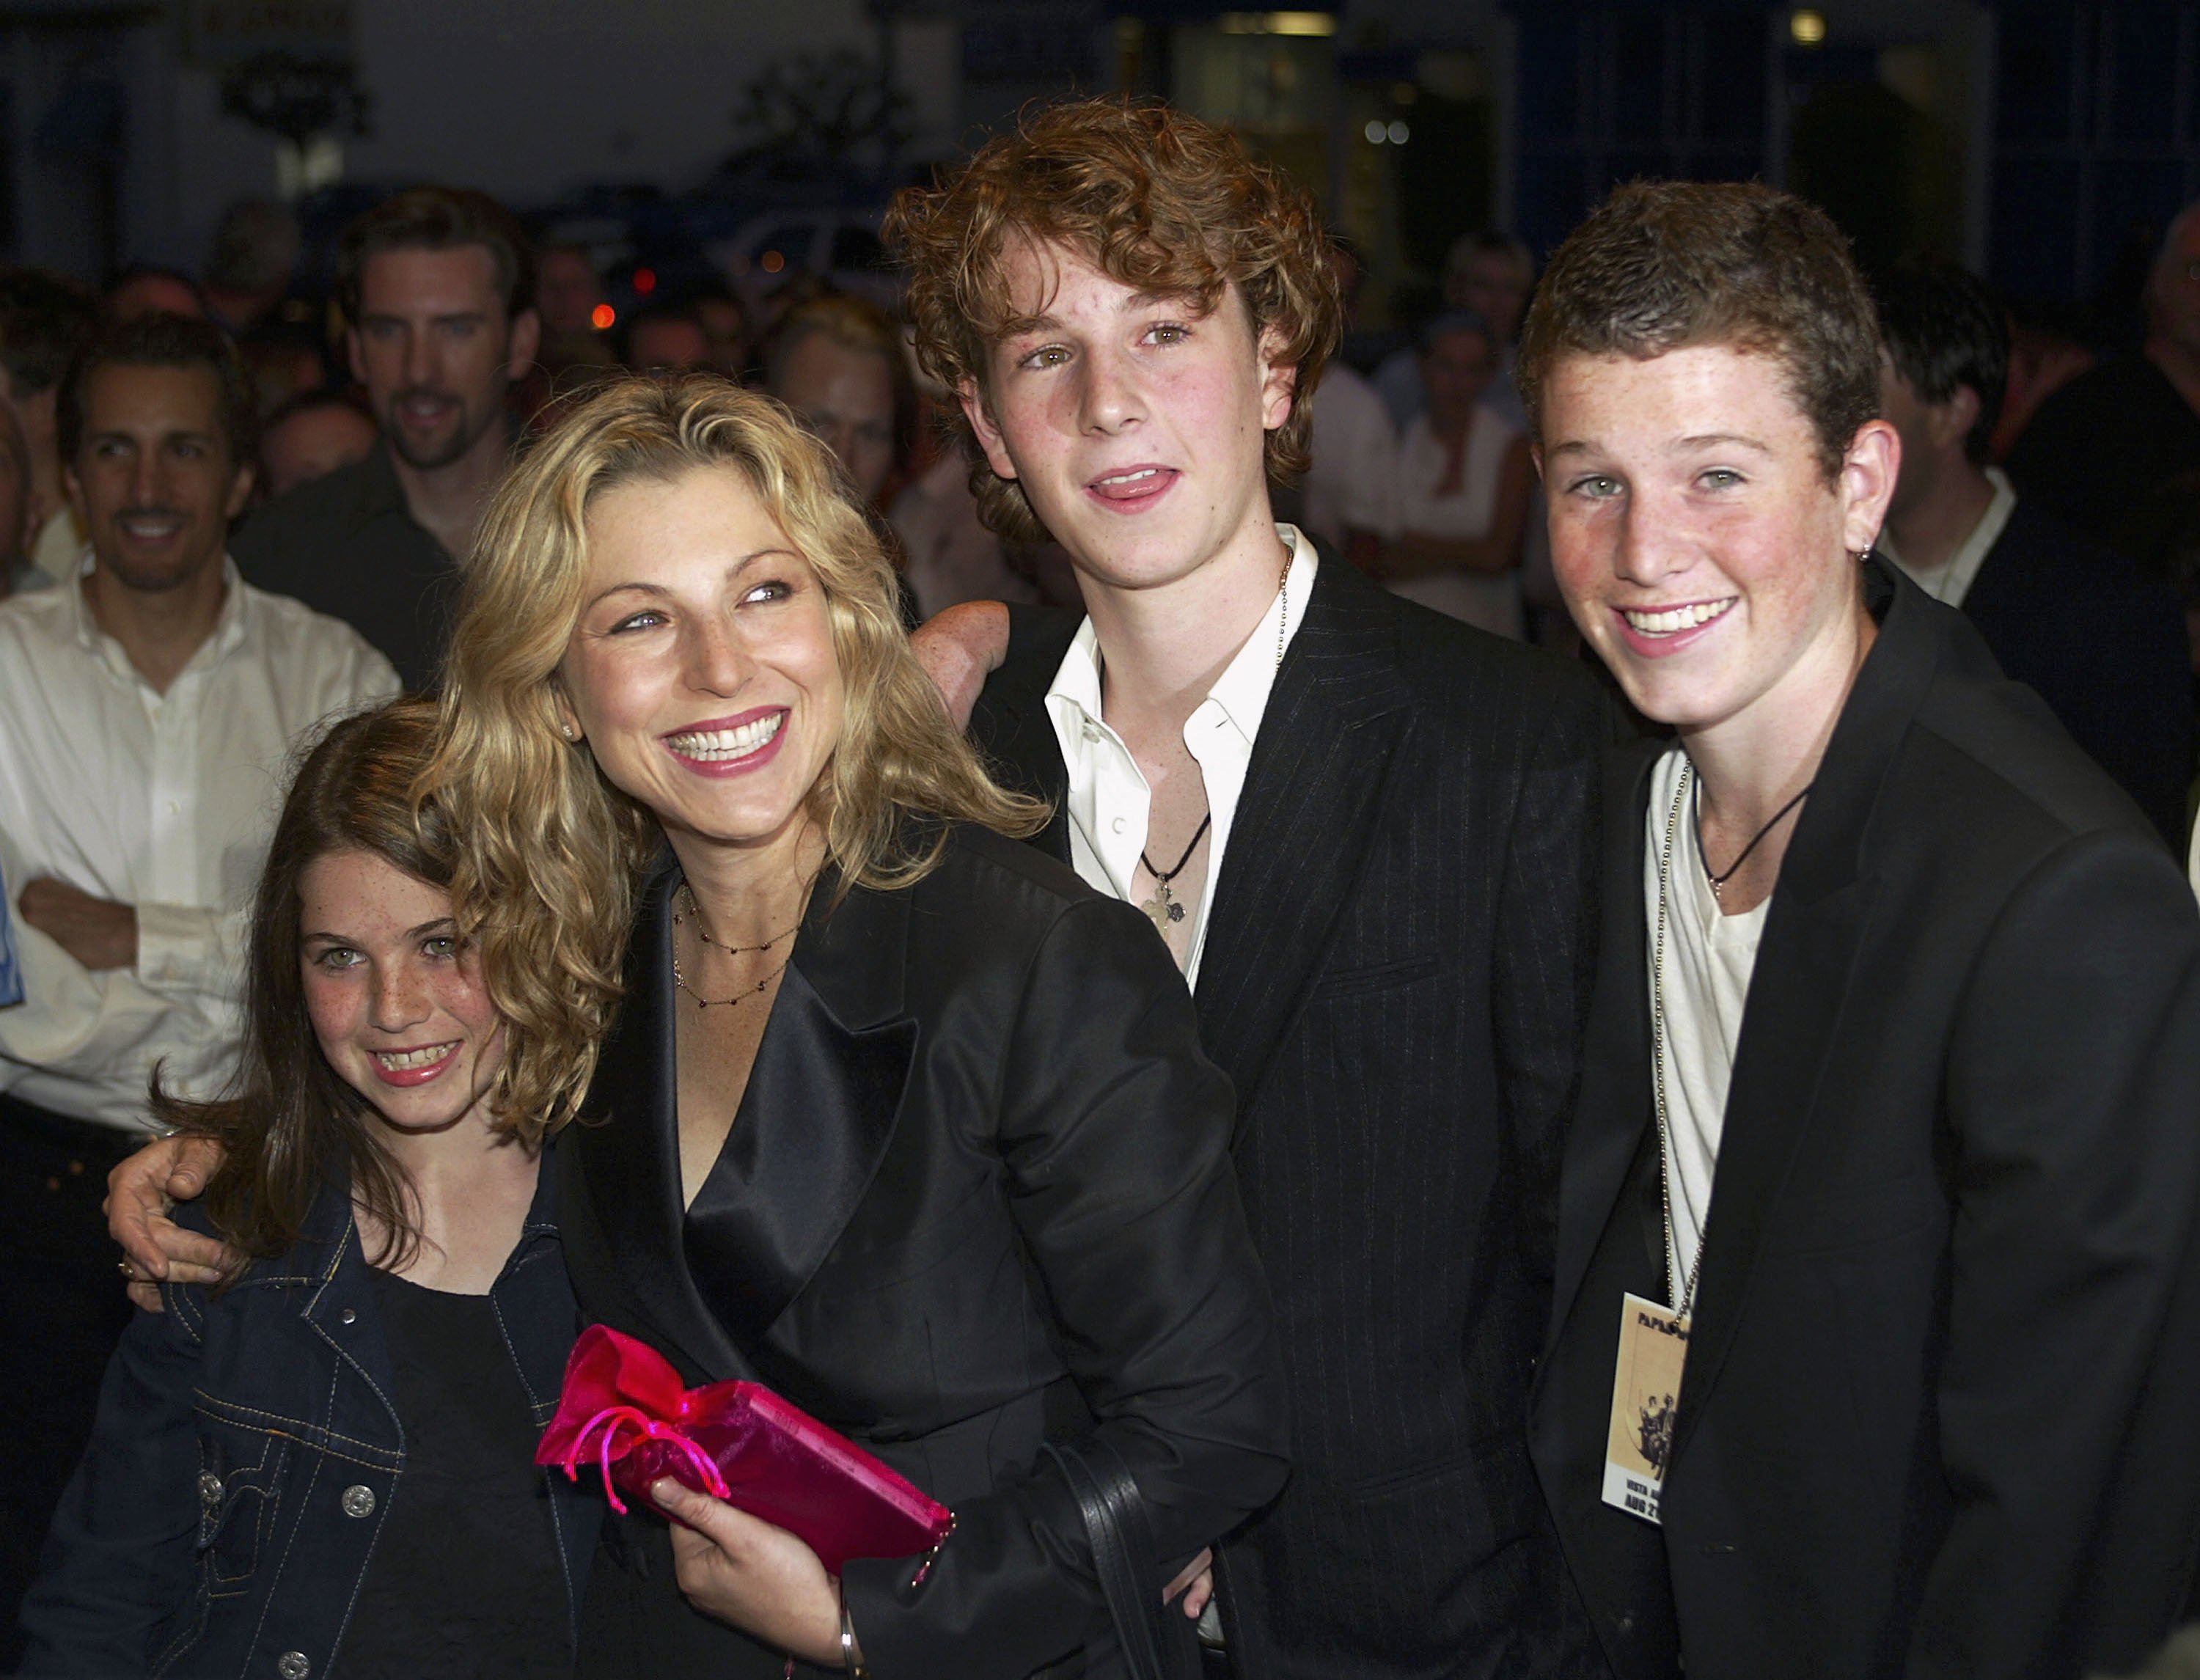 Tatum O'Neal and her children Emily, Kevin and Sean McEnroe arrive at the 30th anniversary screening of "Paper Moon" at the Vista Theater August 21, 2003 in Los Angeles, California. | Photo: GettyImages